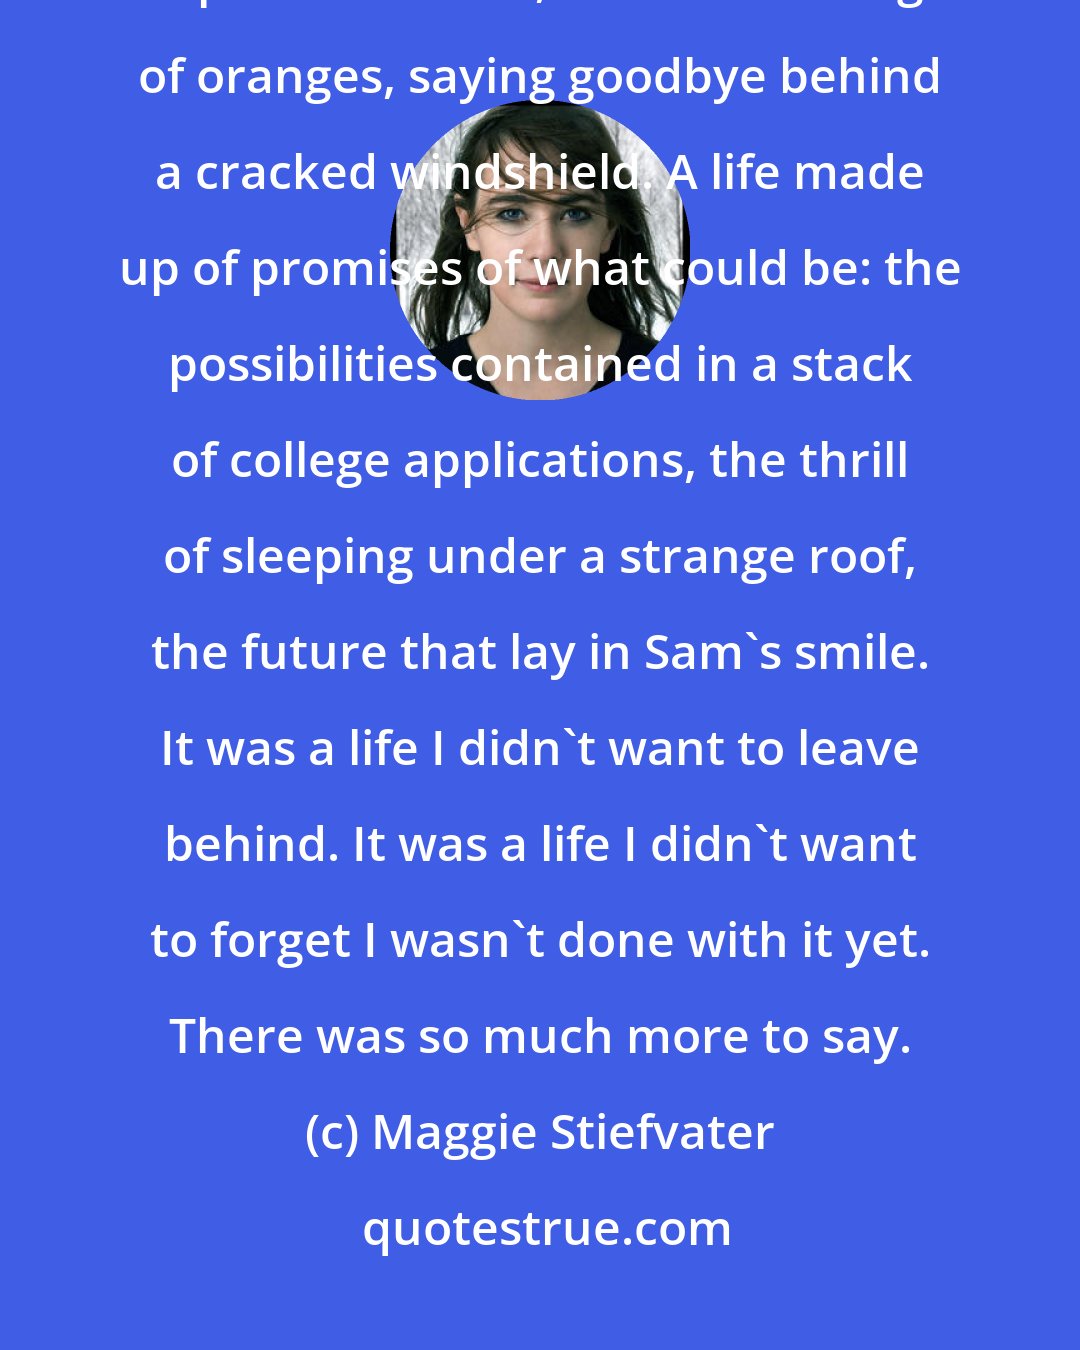 Maggie Stiefvater: Hers was a memory made up of snapshorts: being dragged through the snow by a pack of wolves, first kiss tasting of oranges, saying goodbye behind a cracked windshield. A life made up of promises of what could be: the possibilities contained in a stack of college applications, the thrill of sleeping under a strange roof, the future that lay in Sam's smile. It was a life I didn't want to leave behind. It was a life I didn't want to forget I wasn't done with it yet. There was so much more to say.